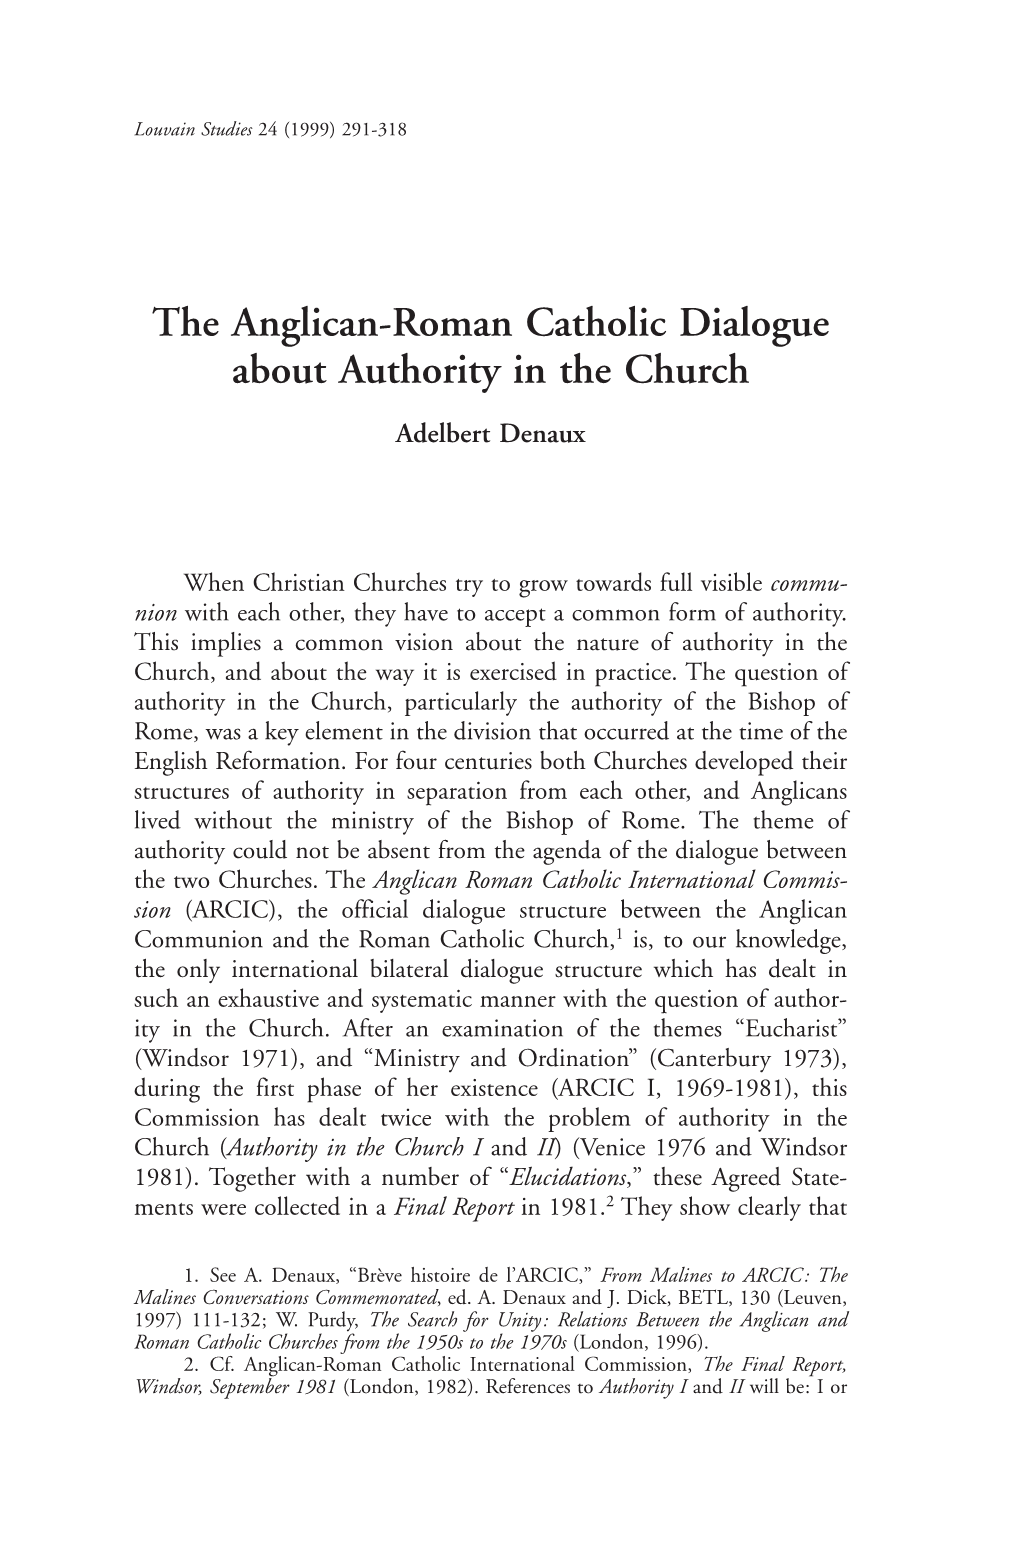 The Anglican-Roman Catholic Dialogue About Authority in the Church Adelbert Denaux